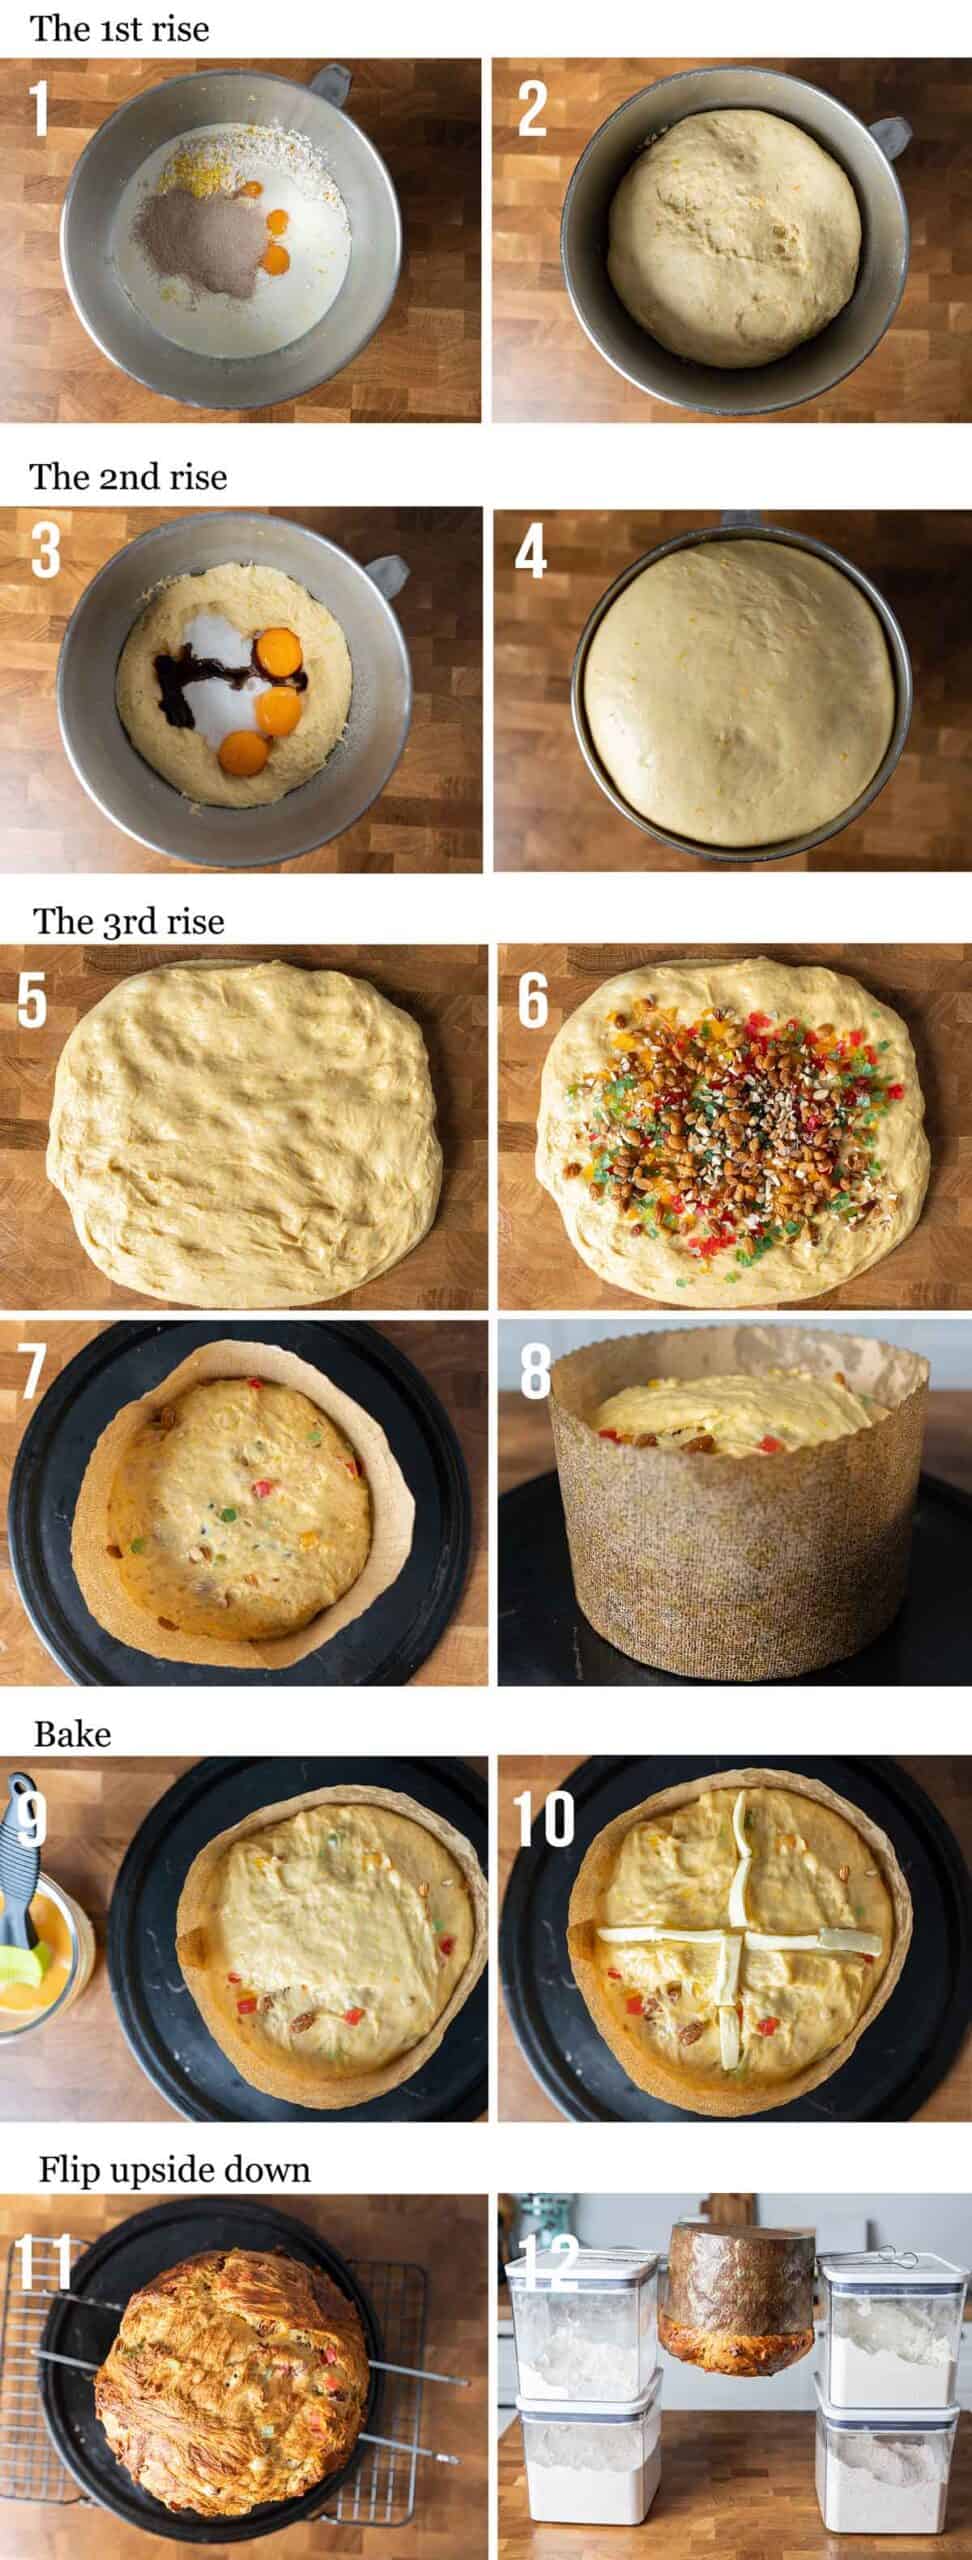 Steps on how to make panettone.